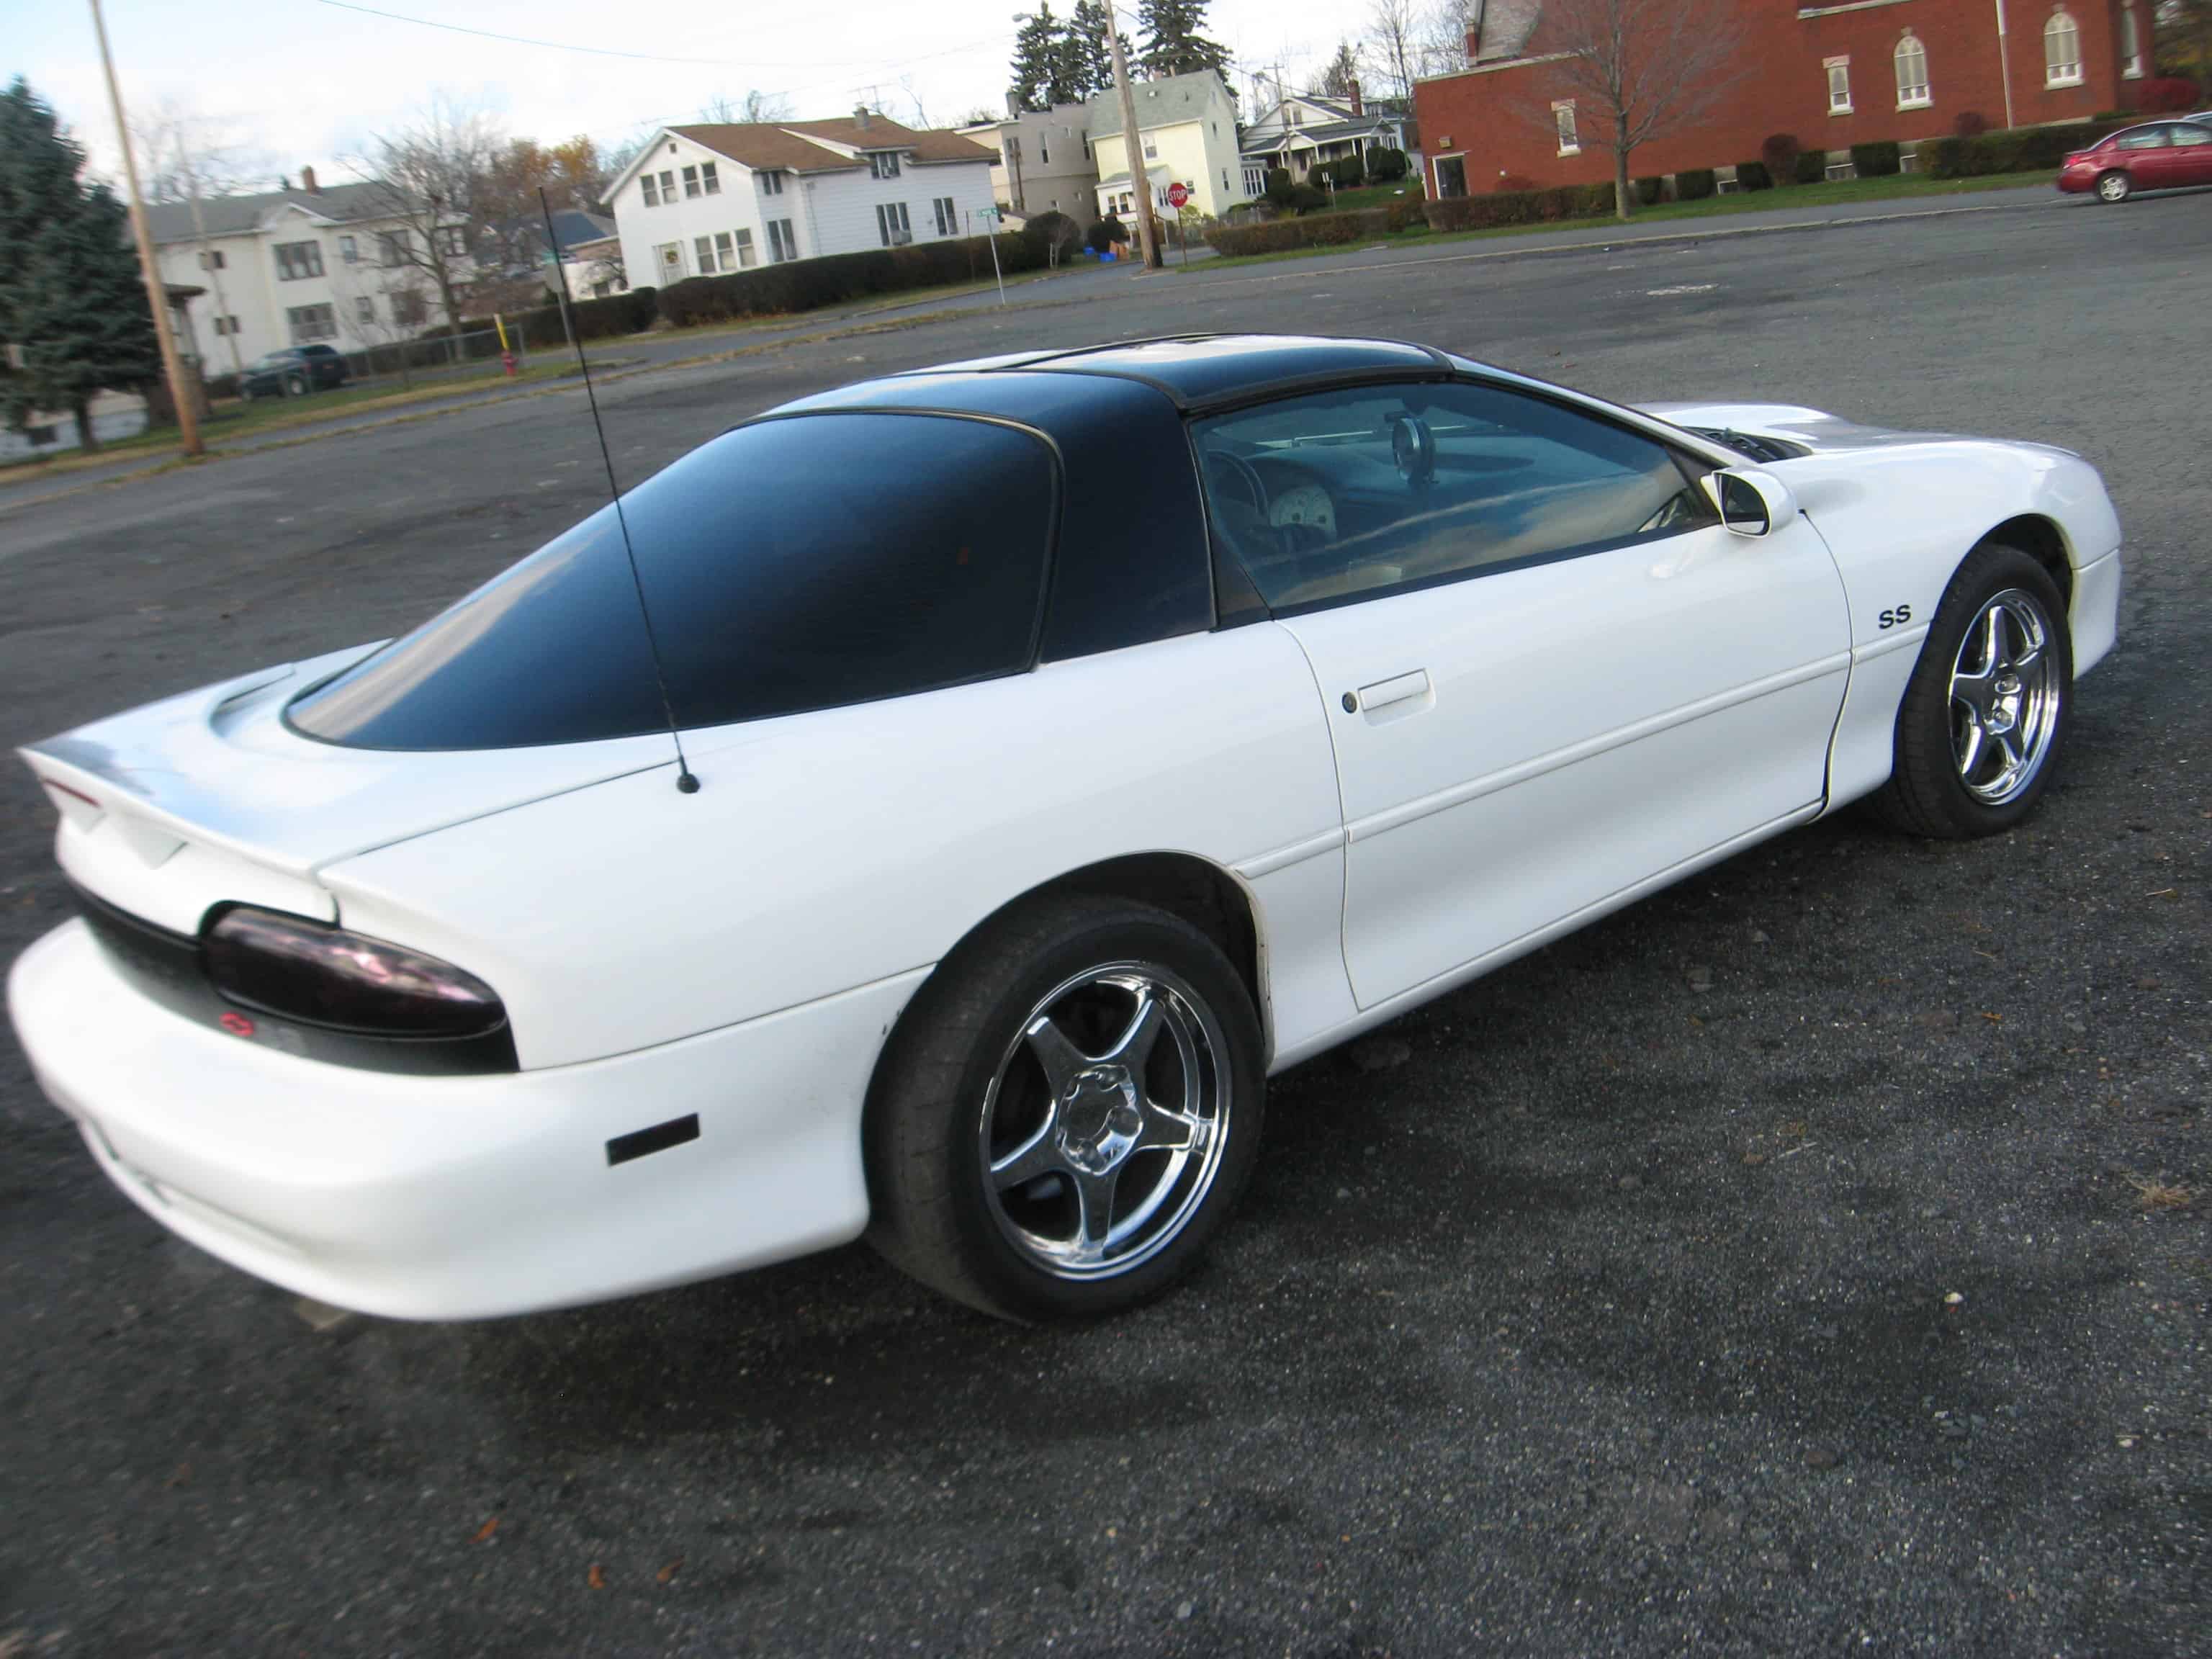 2000 Camaro - Muscle Car Facts